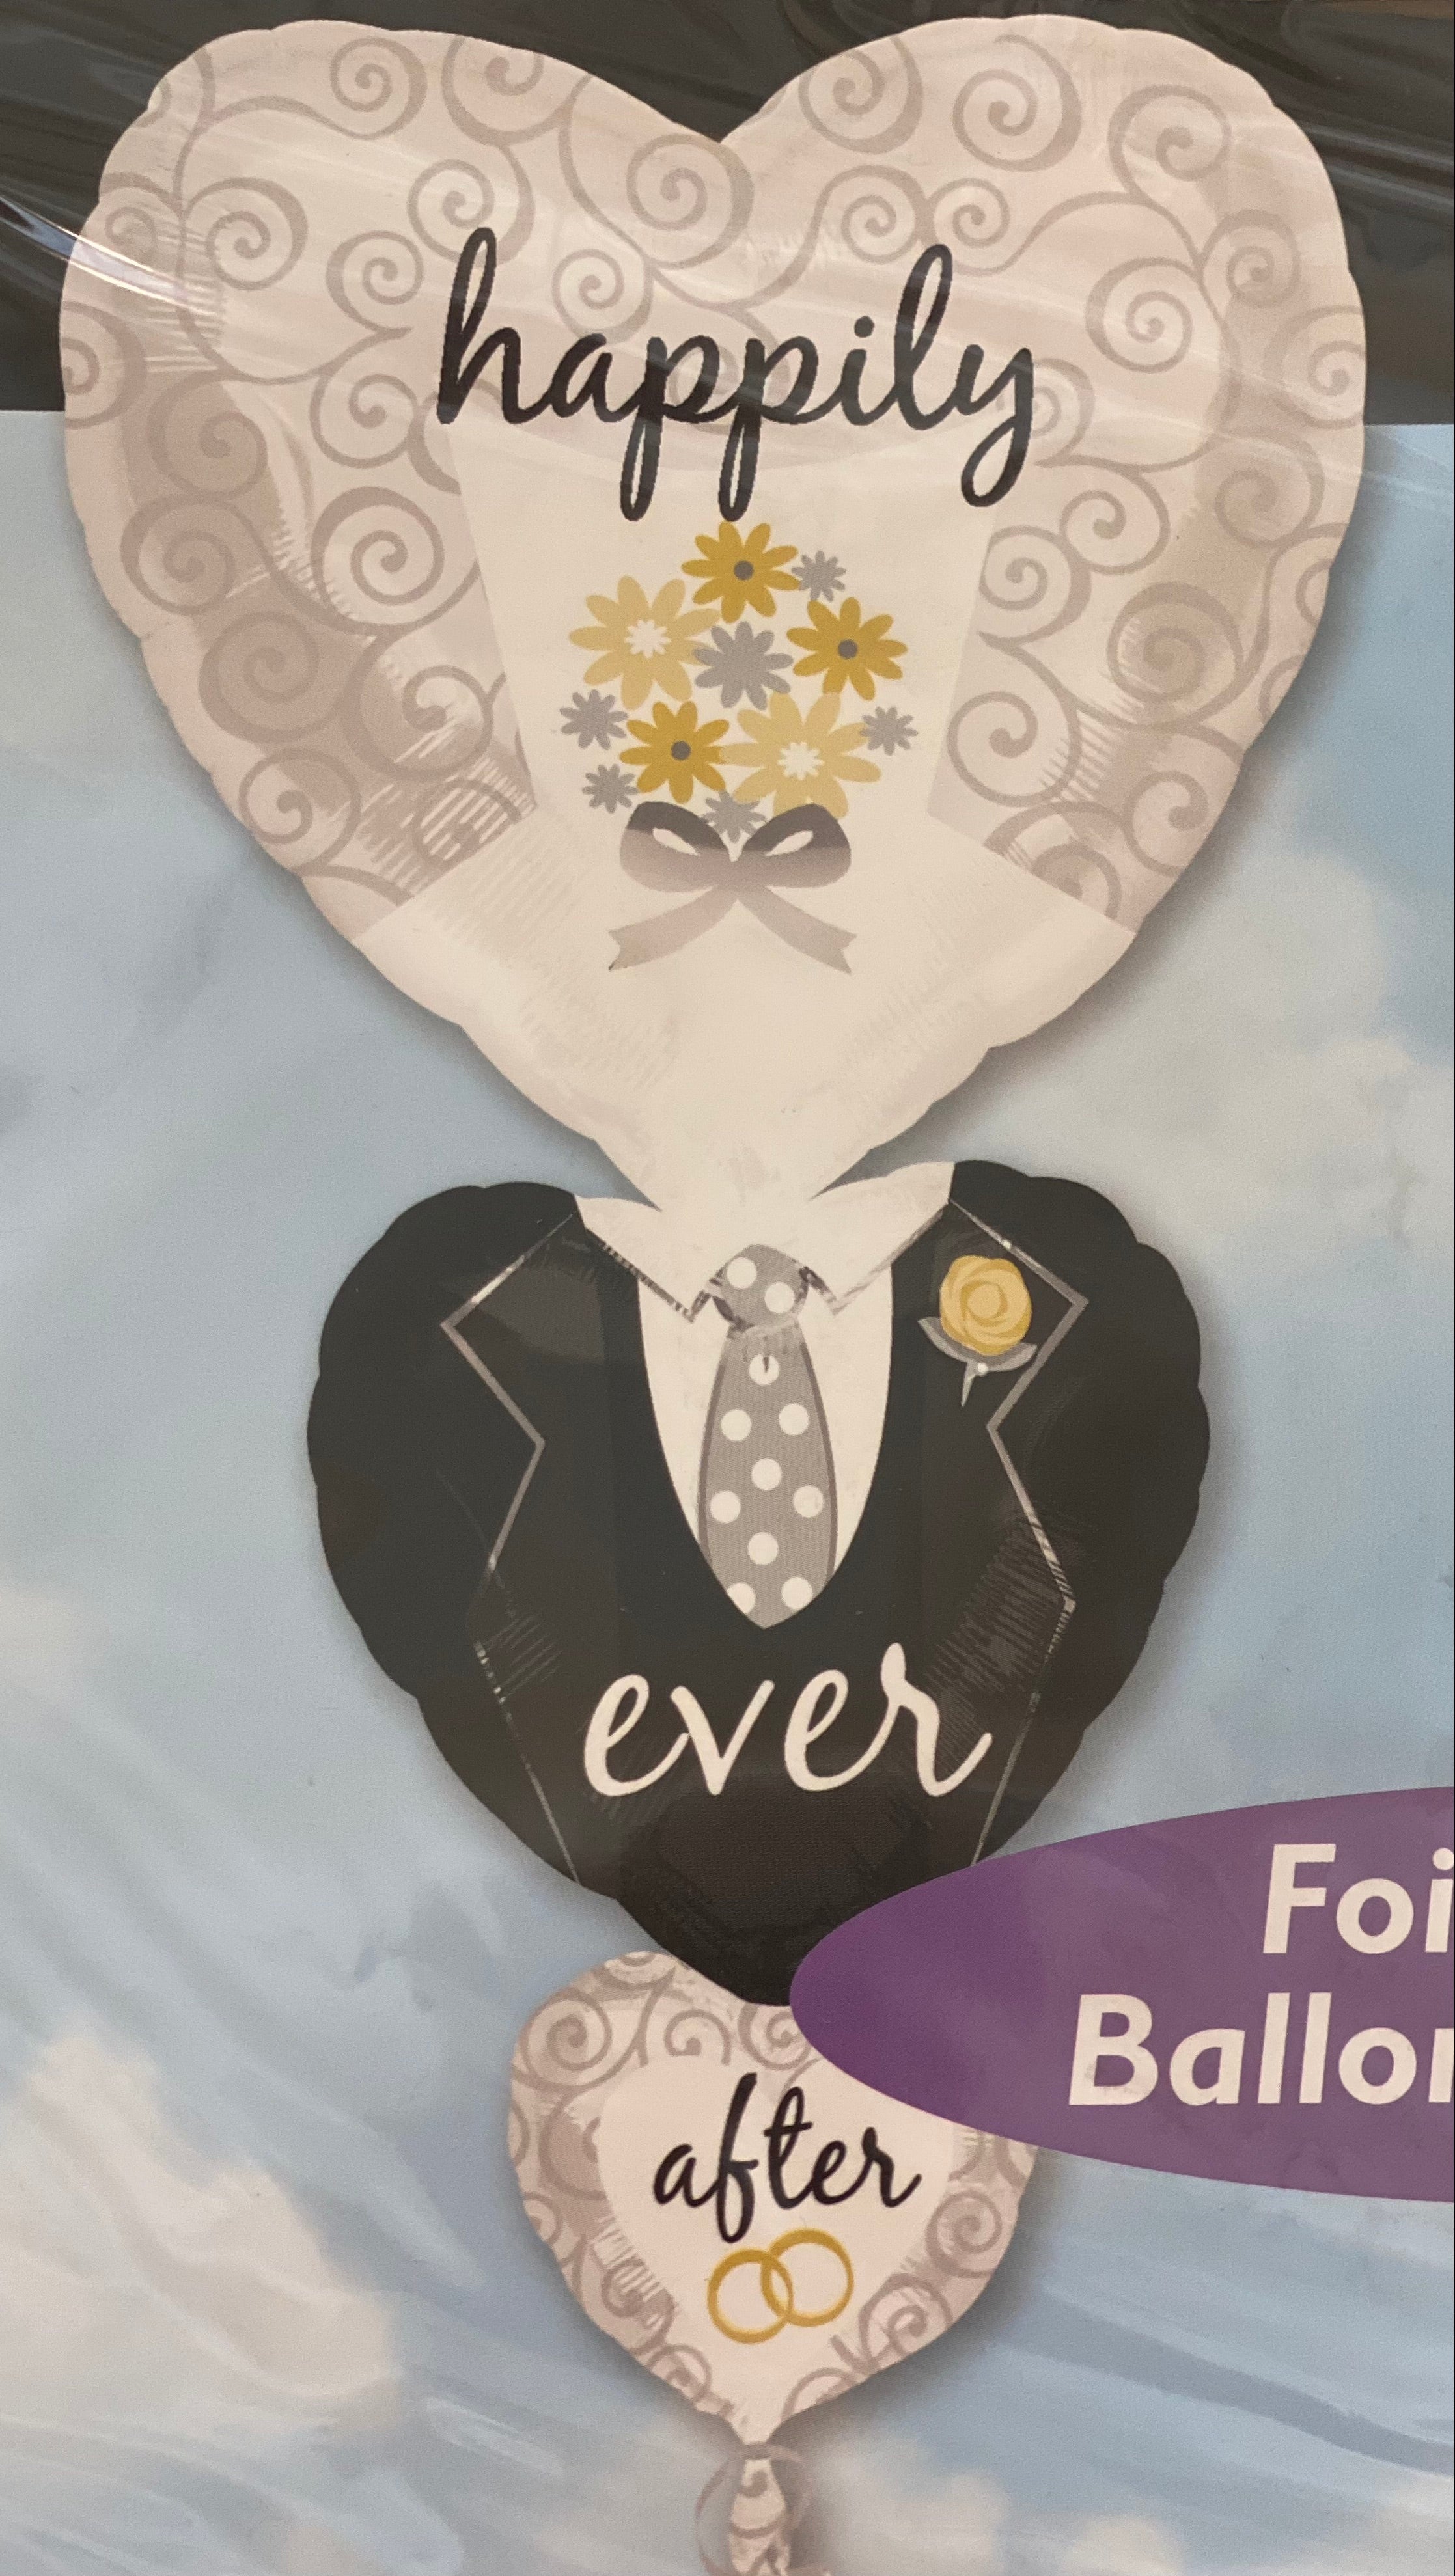 Happily Ever After SuperShape Foil Balloon